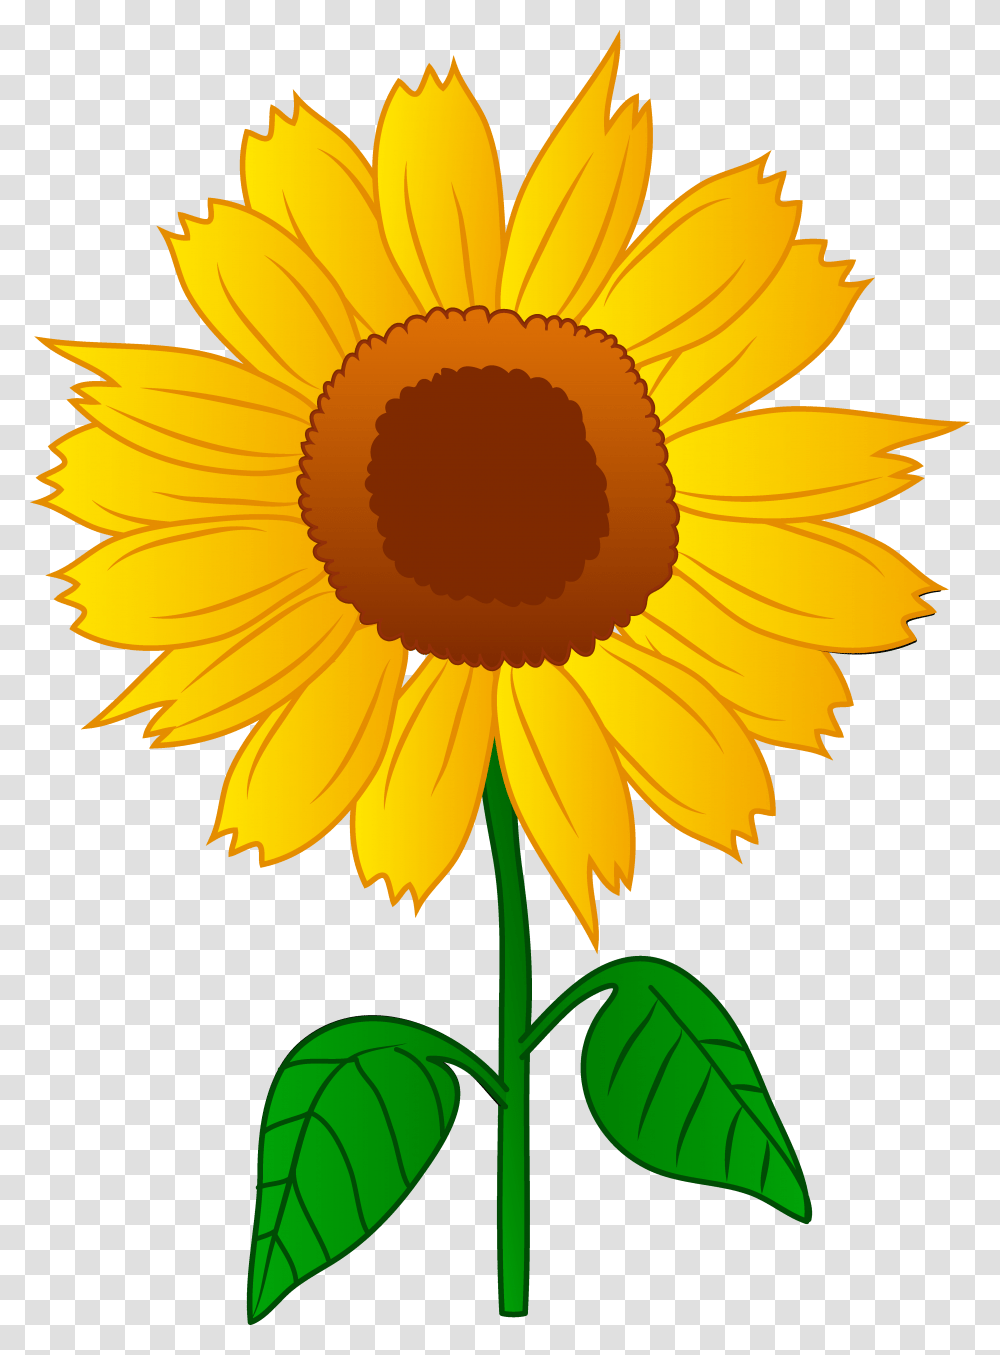 Free Sunflower Clipart Clipart Image Of Sunflower, Plant, Blossom, Banana, Fruit Transparent Png